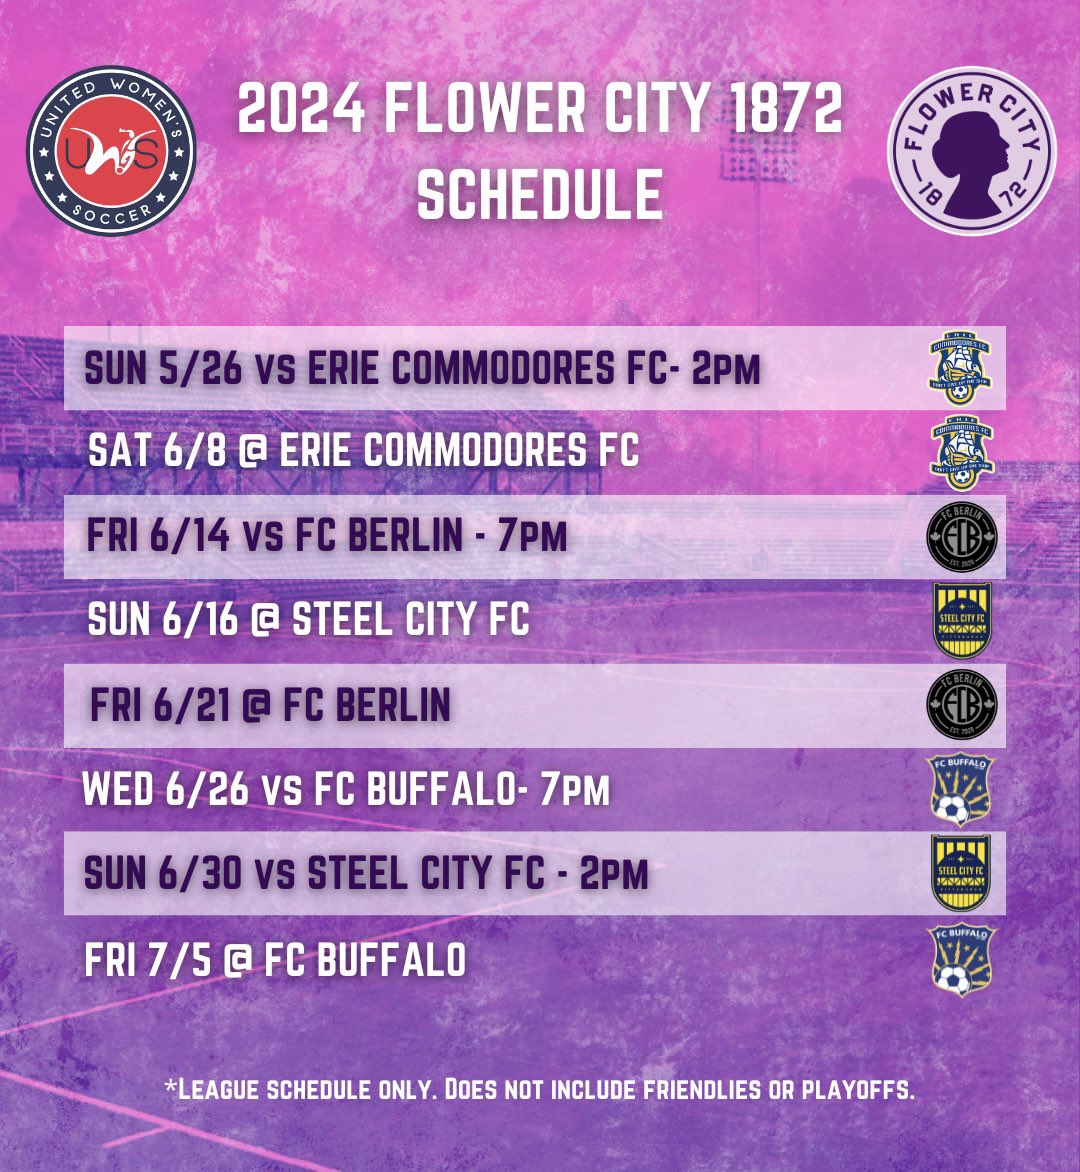 The 2024 @UWSSoccer conference schedule has dropped! Mark your calendars and don’t forget to get your season tickets. 

#flowercity1872 #rochesterny #rootedinrochester